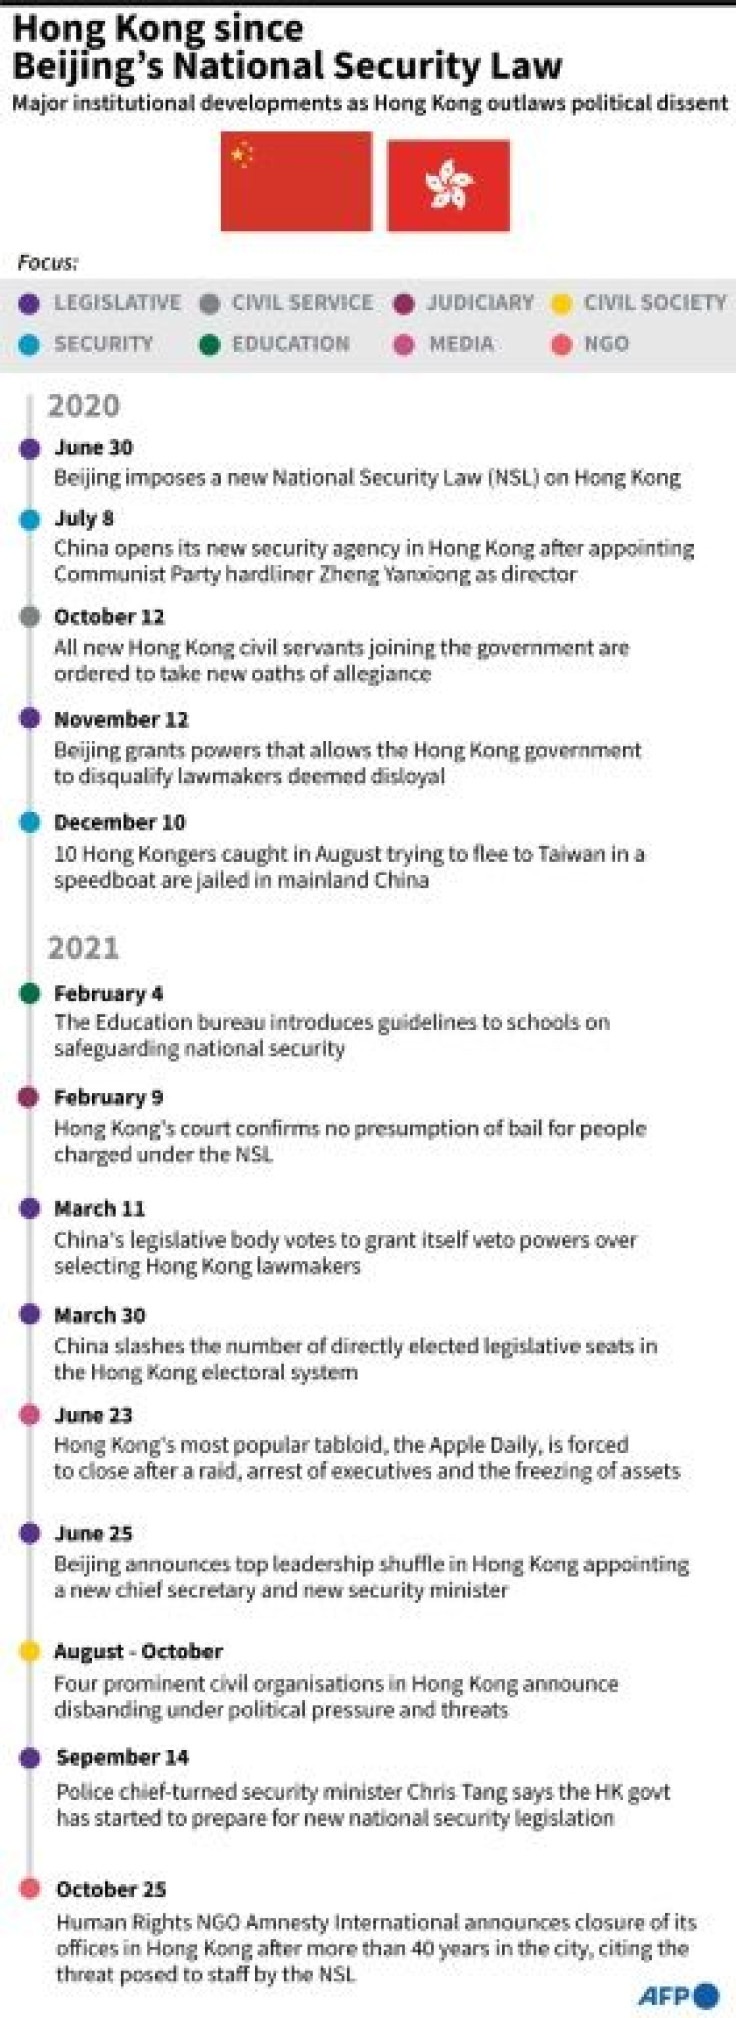 Timeline on major institutional developments as Hong Kong outlaws political dissent, following the passing of China's National Security Law in June 2020